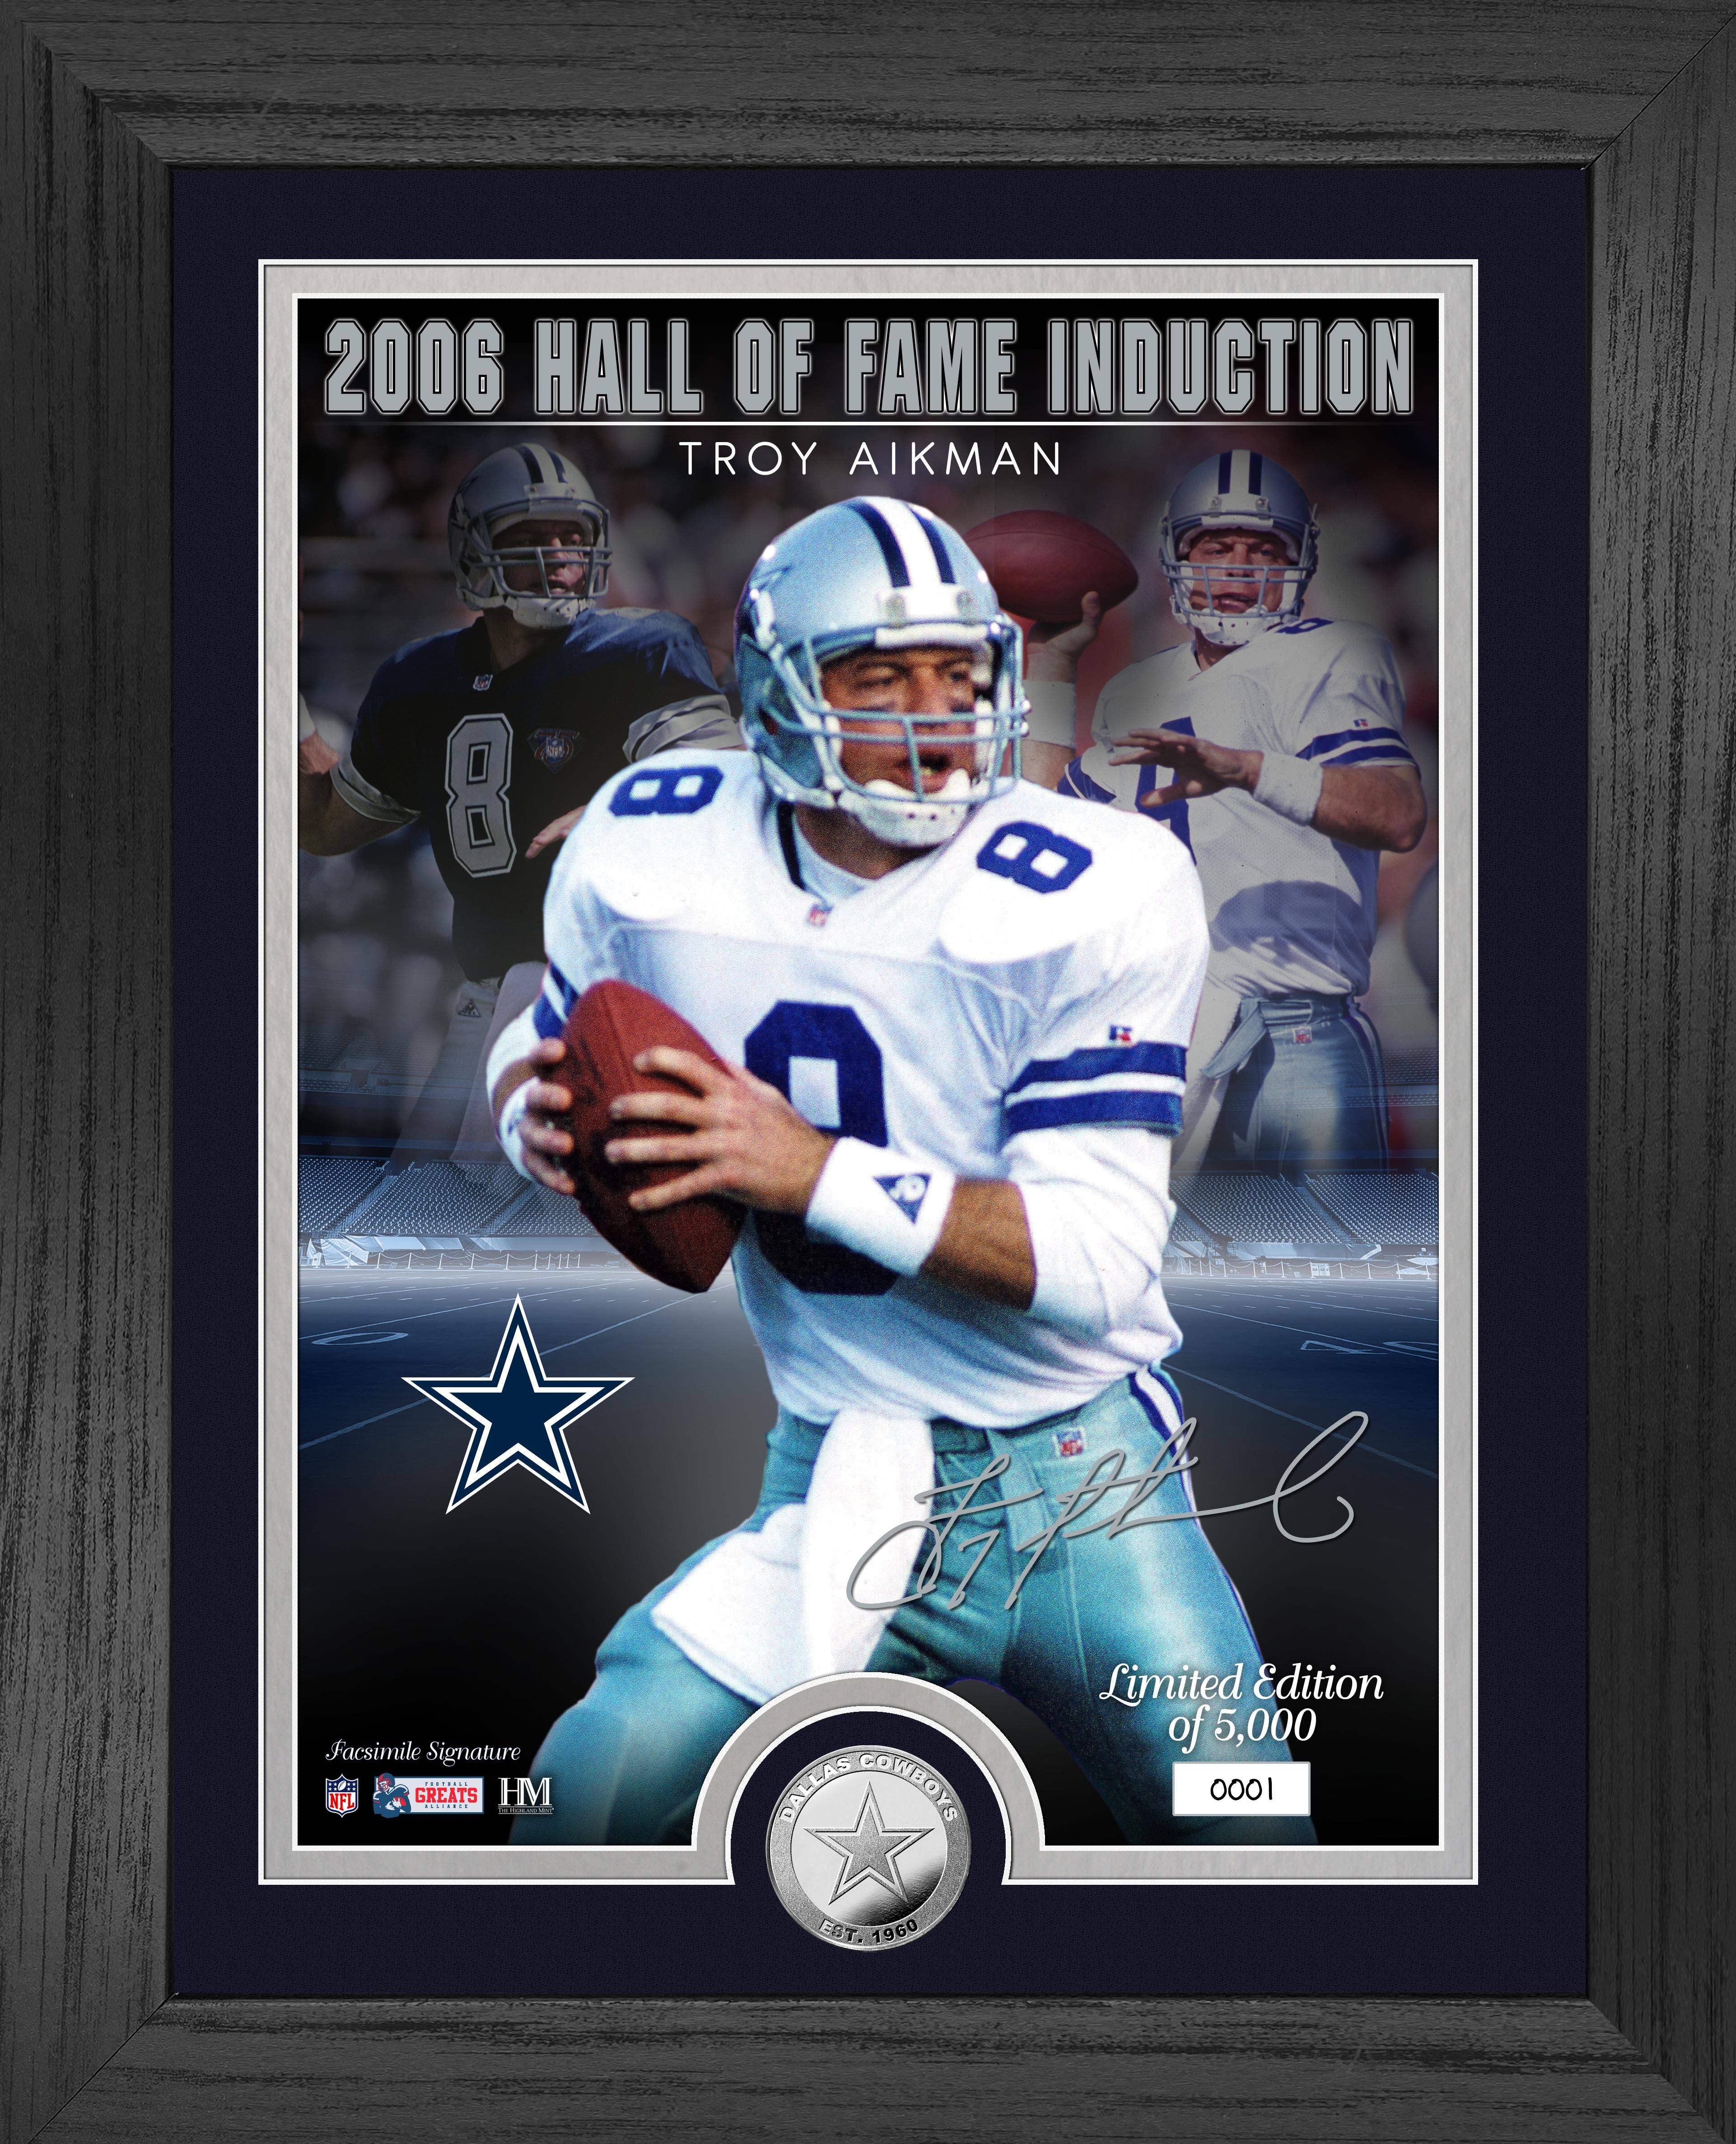 Troy Aikman Cowboys Hall of Fame Induction Silver Coin Signature Photo Mint